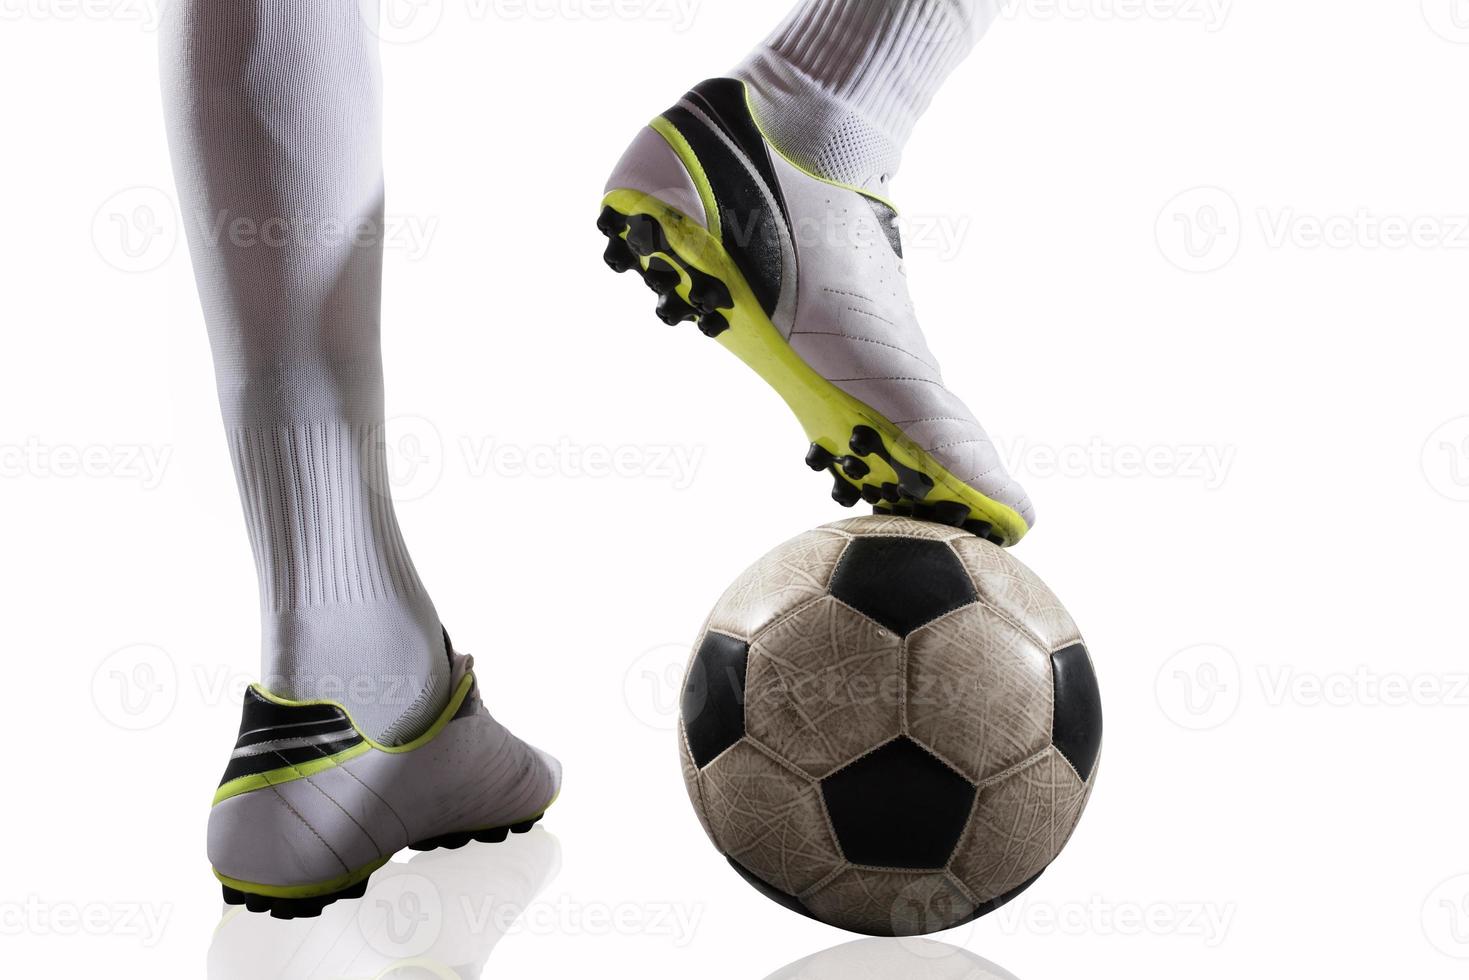 Soccer player with soccerball ready to play. Isolated on white background photo